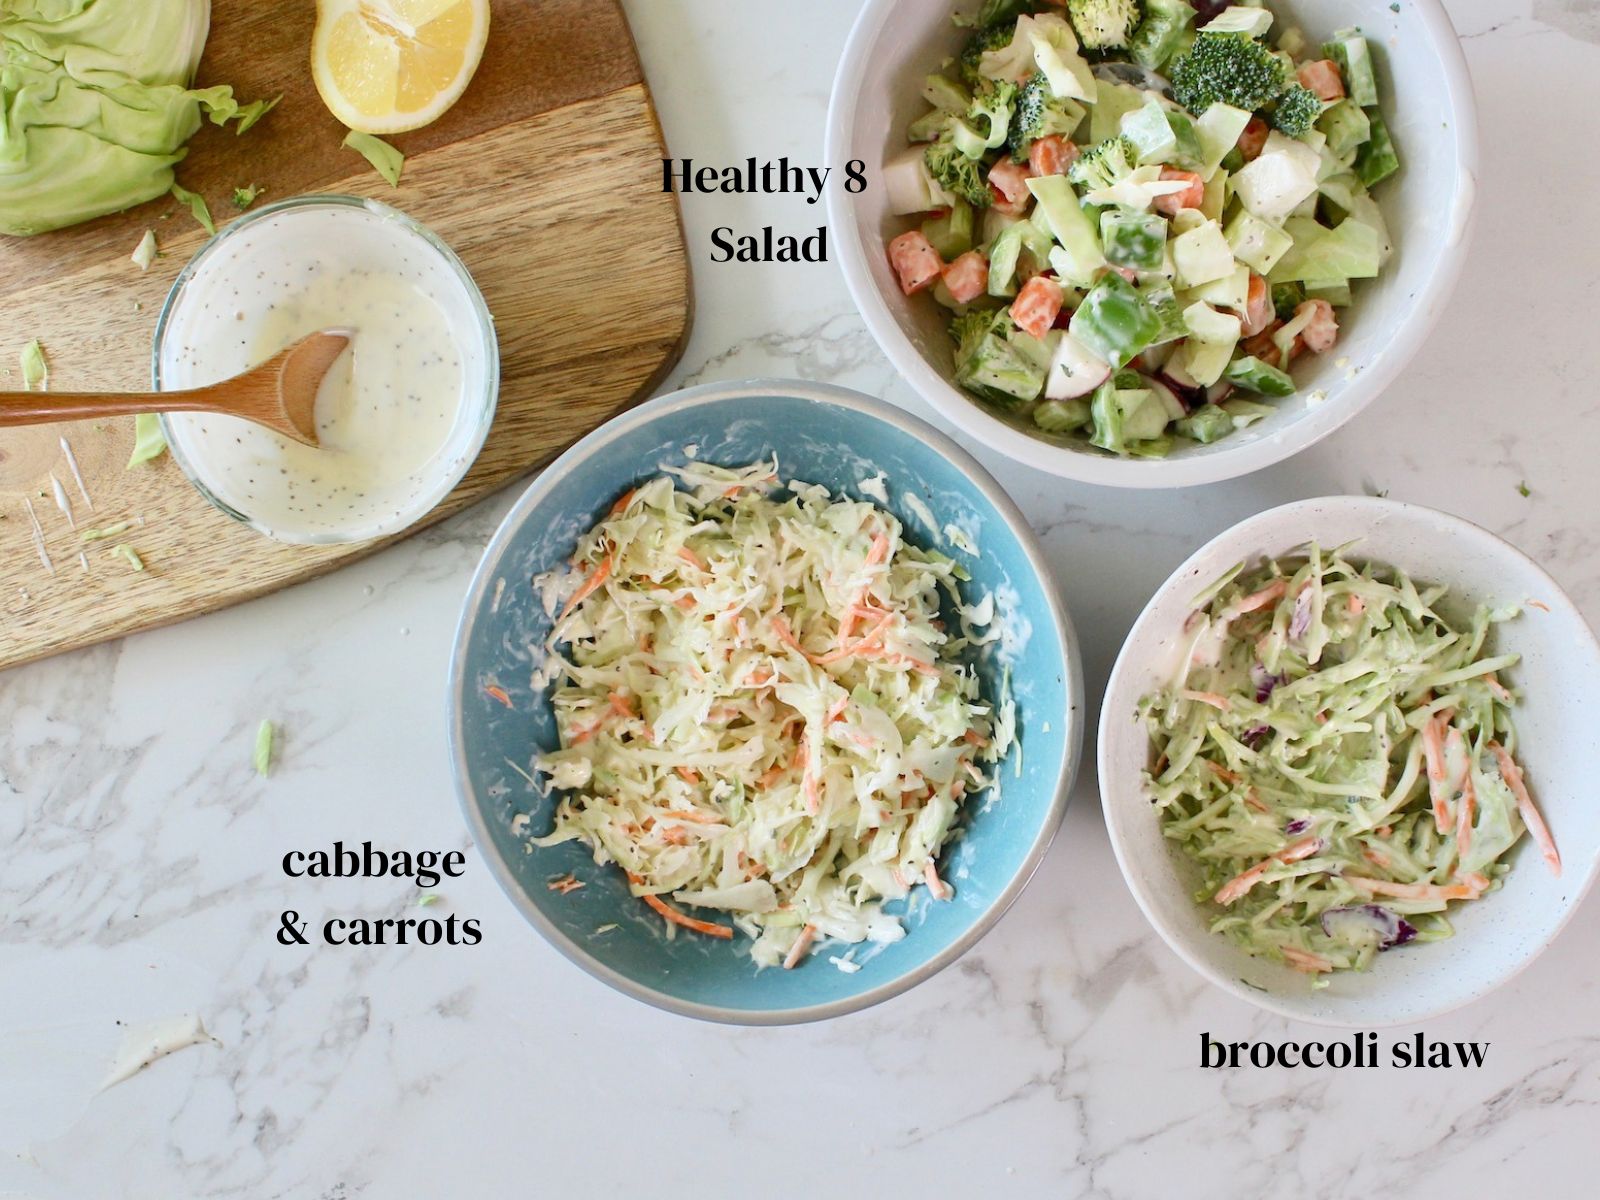 3 salads made with coleslaw dressing